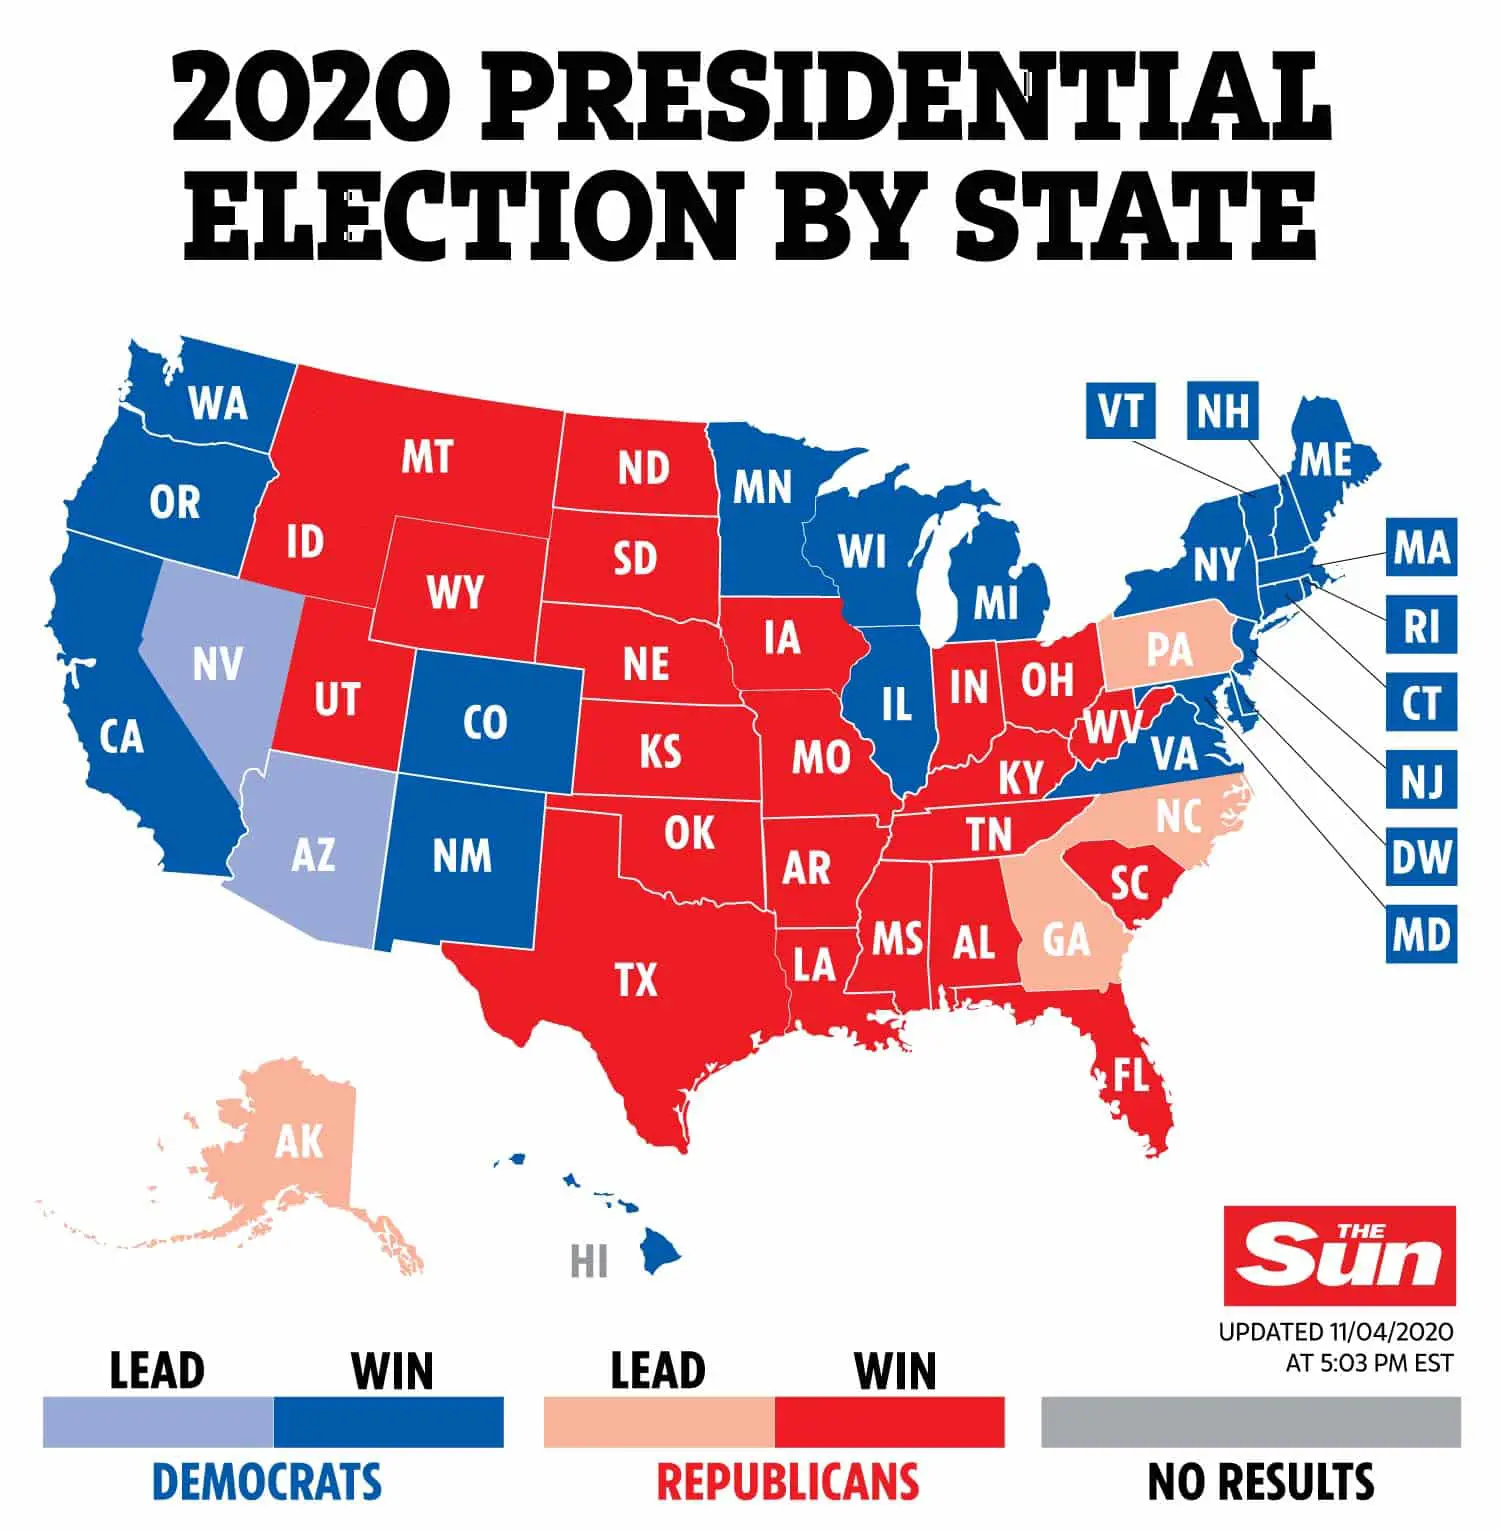 Full US election results